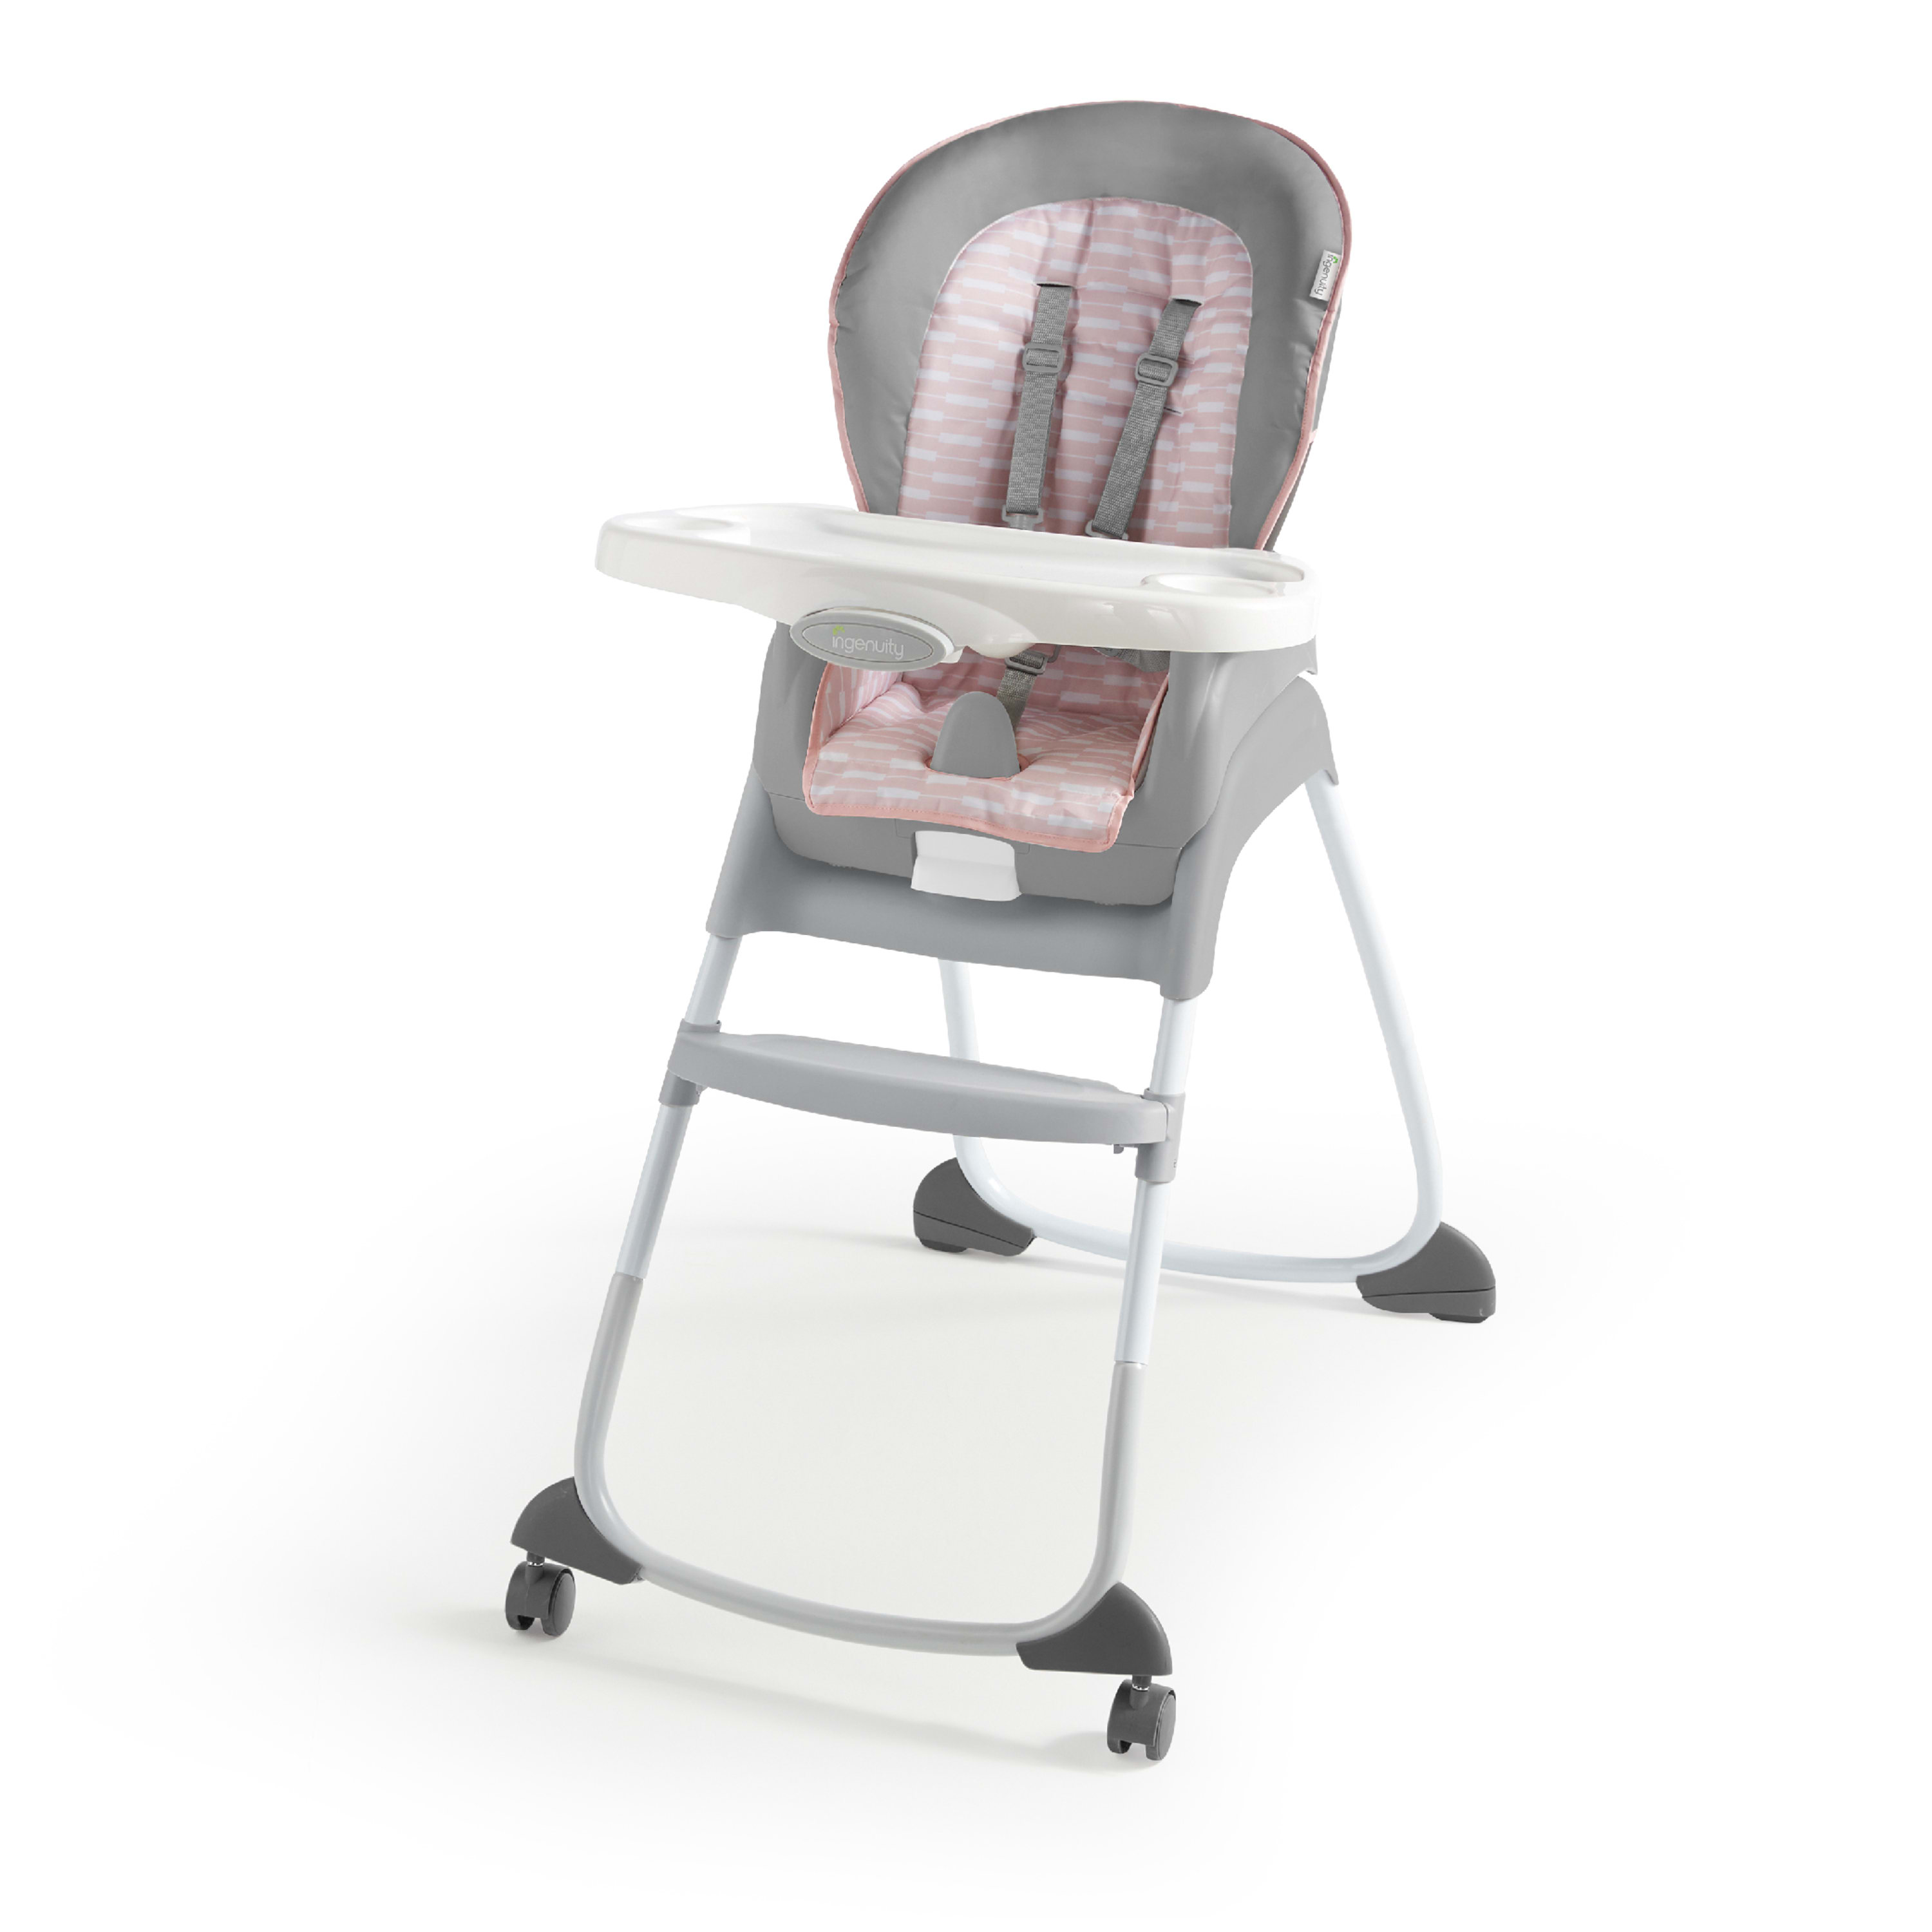 Ingenuity Trio 3-in-1 Convertible High Chair, Toddler Chair, Booster Seat - Flora The Unicorn - image 3 of 18